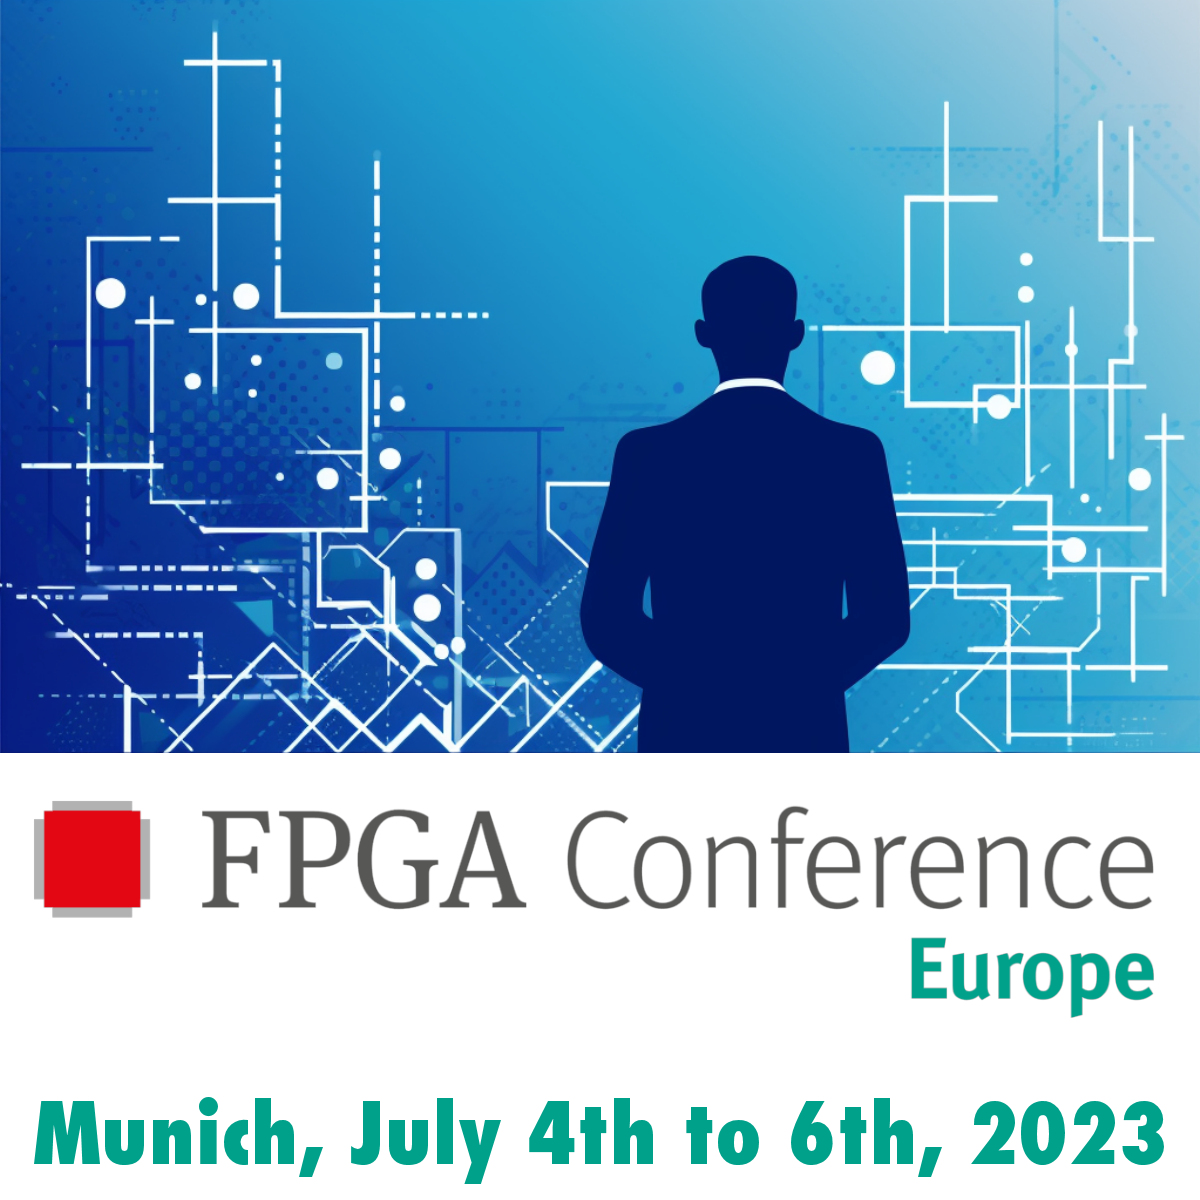 Trenz Electronic GmbH is set to exhibit at the FPGA Conference Europe in a month. If attending, consider visiting their booth. sundance.com/fpga-conferenc… @PLC2GmbH 🗓️📍  via Bend.ai #FPGAConferenceEurope #TrenzElectronic